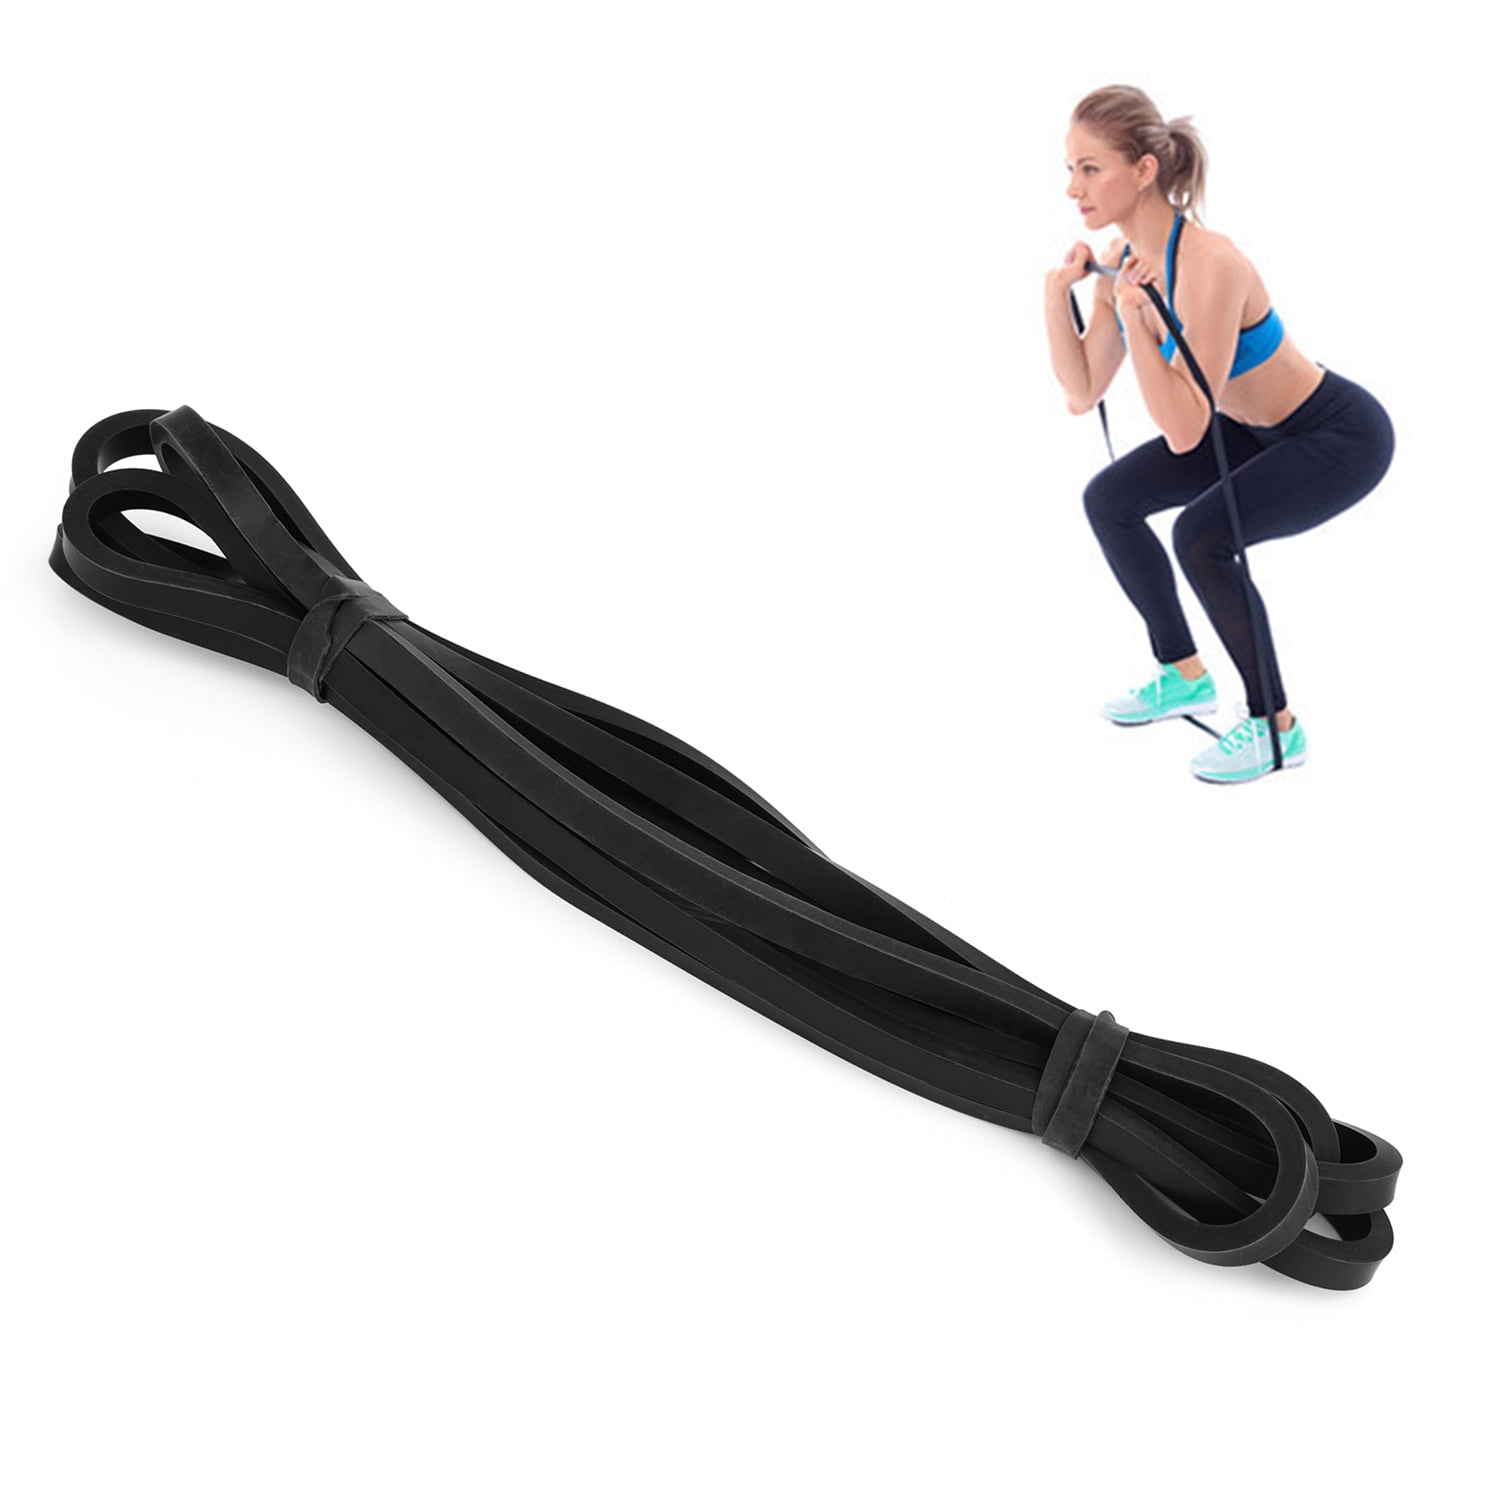 Details about   NEW Resistance Bands Natural Latex Loop Pull Up Assist Band Exercise Gym FitBJ 